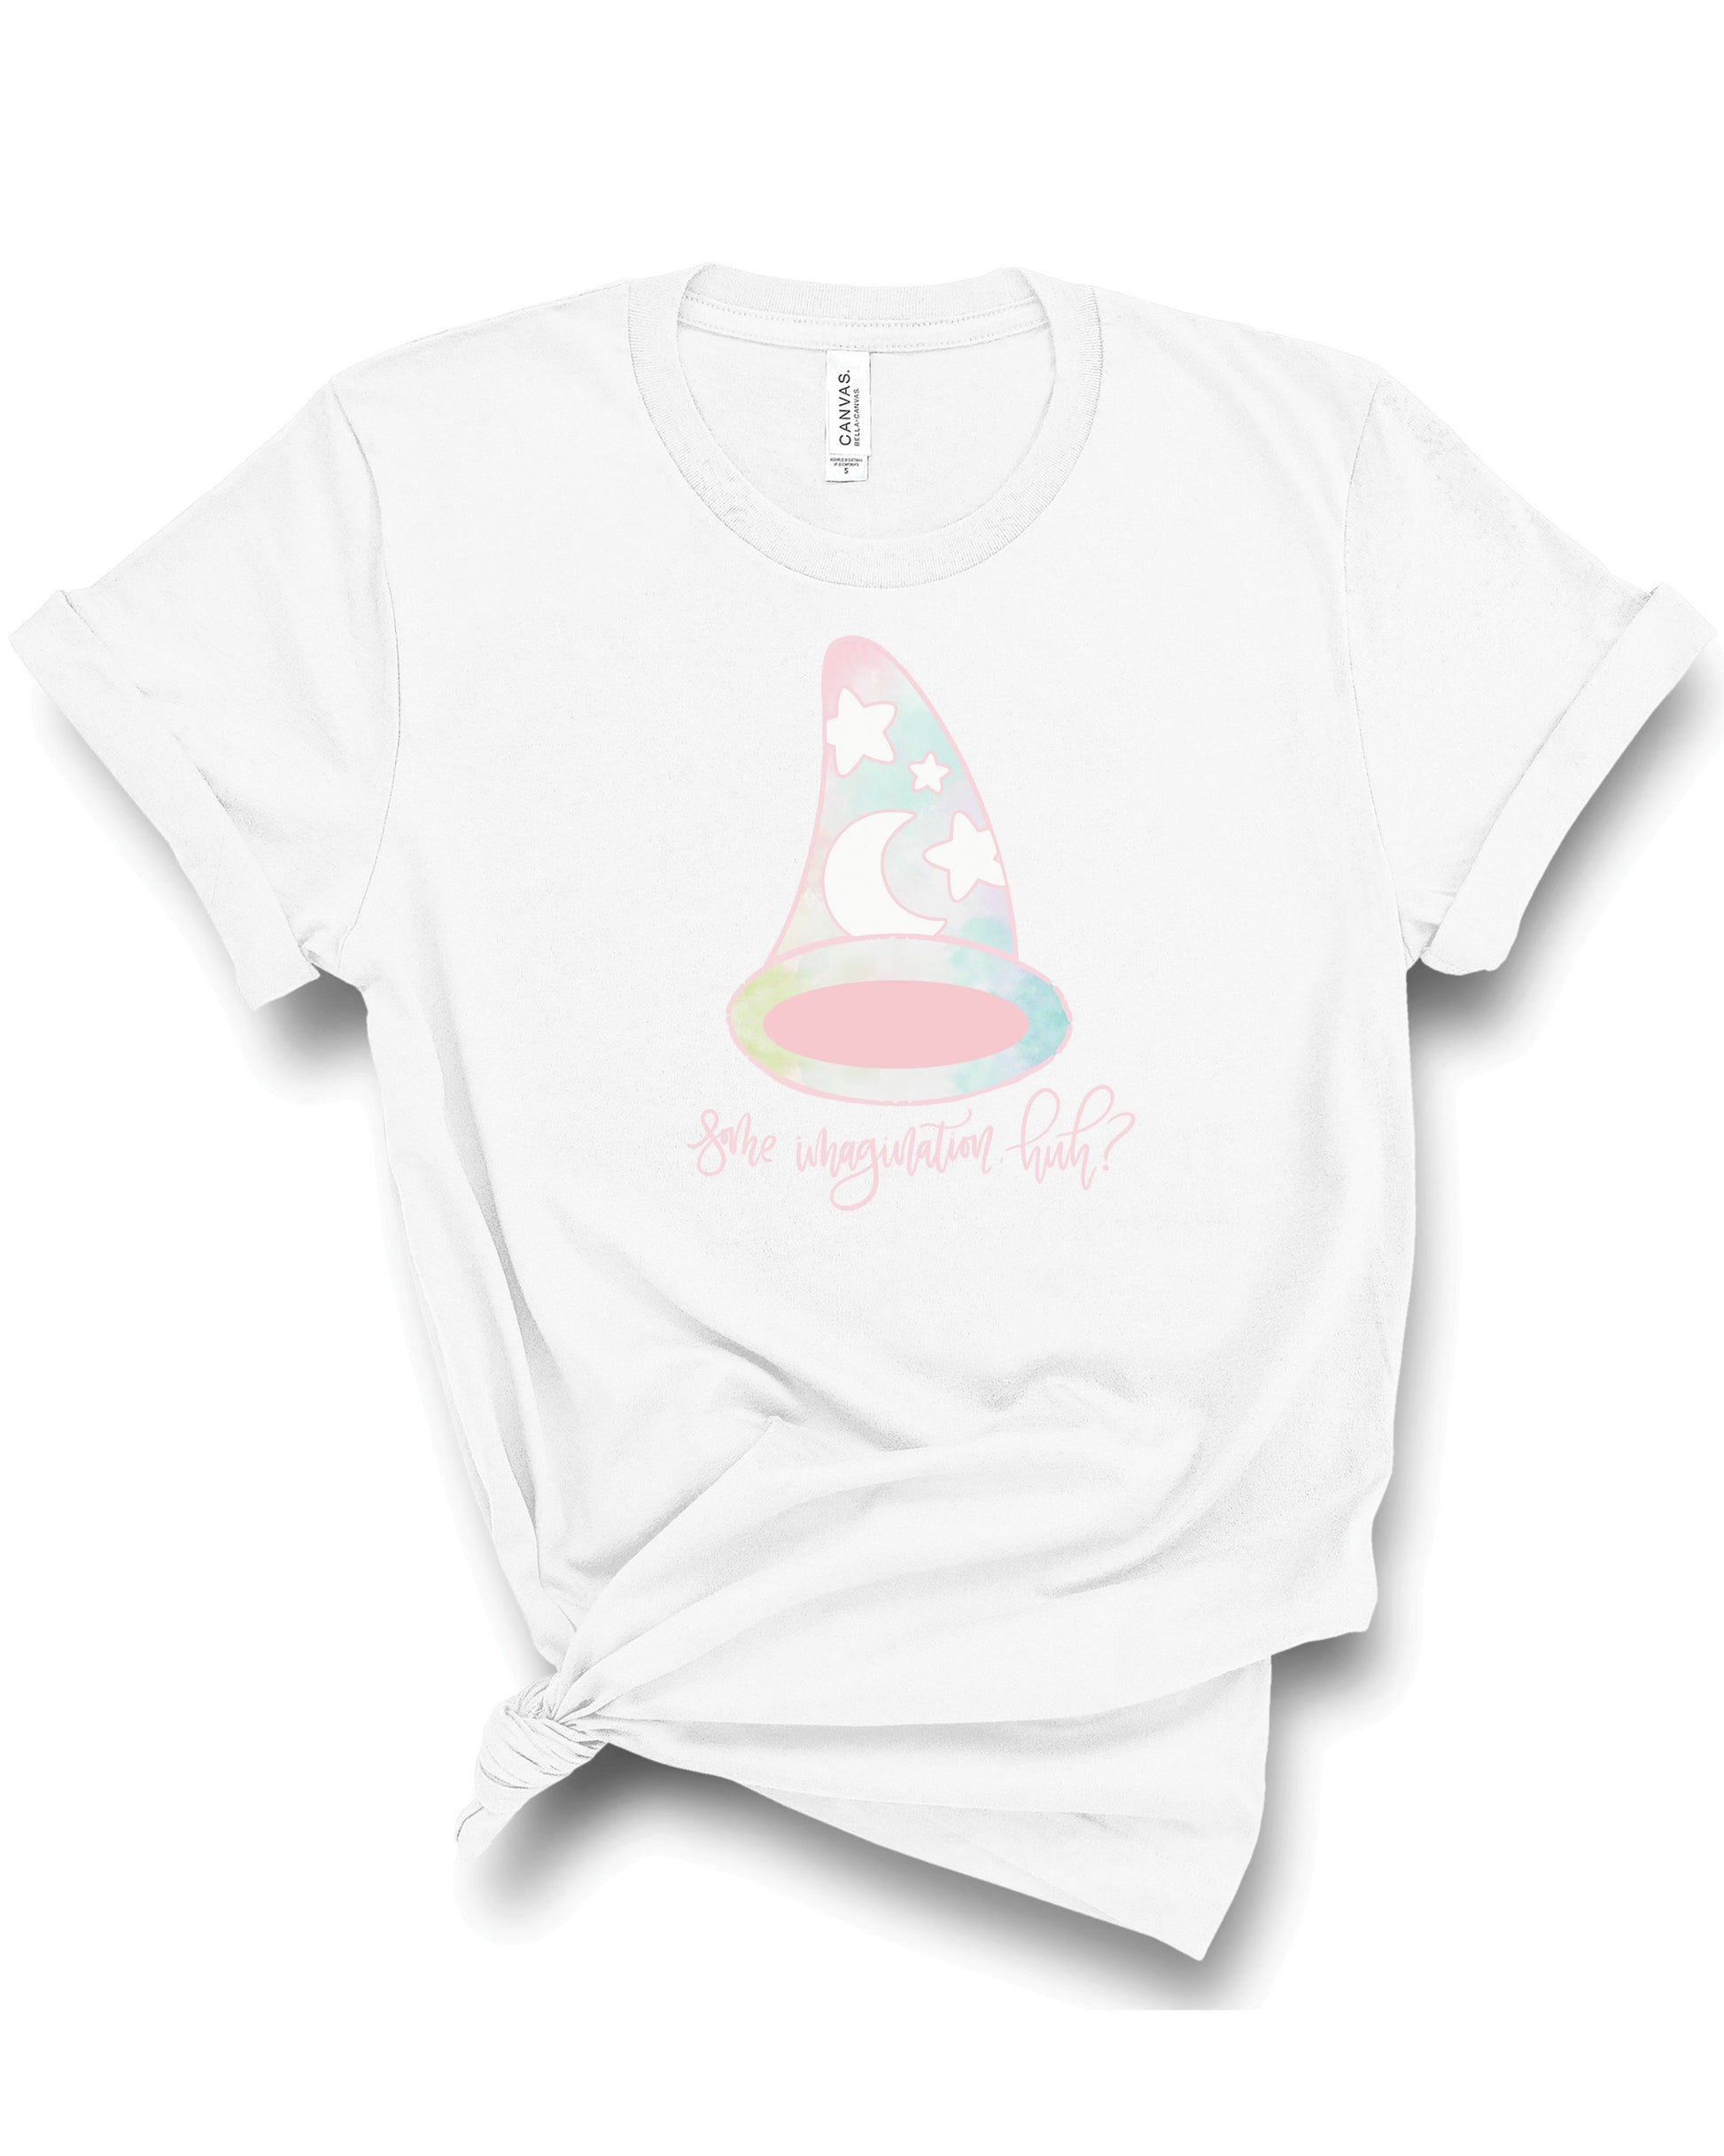 Some Imagination | Tee | Adult-Sister Shirts-Sister Shirts, Cute & Custom Tees for Mama & Littles in Trussville, Alabama.